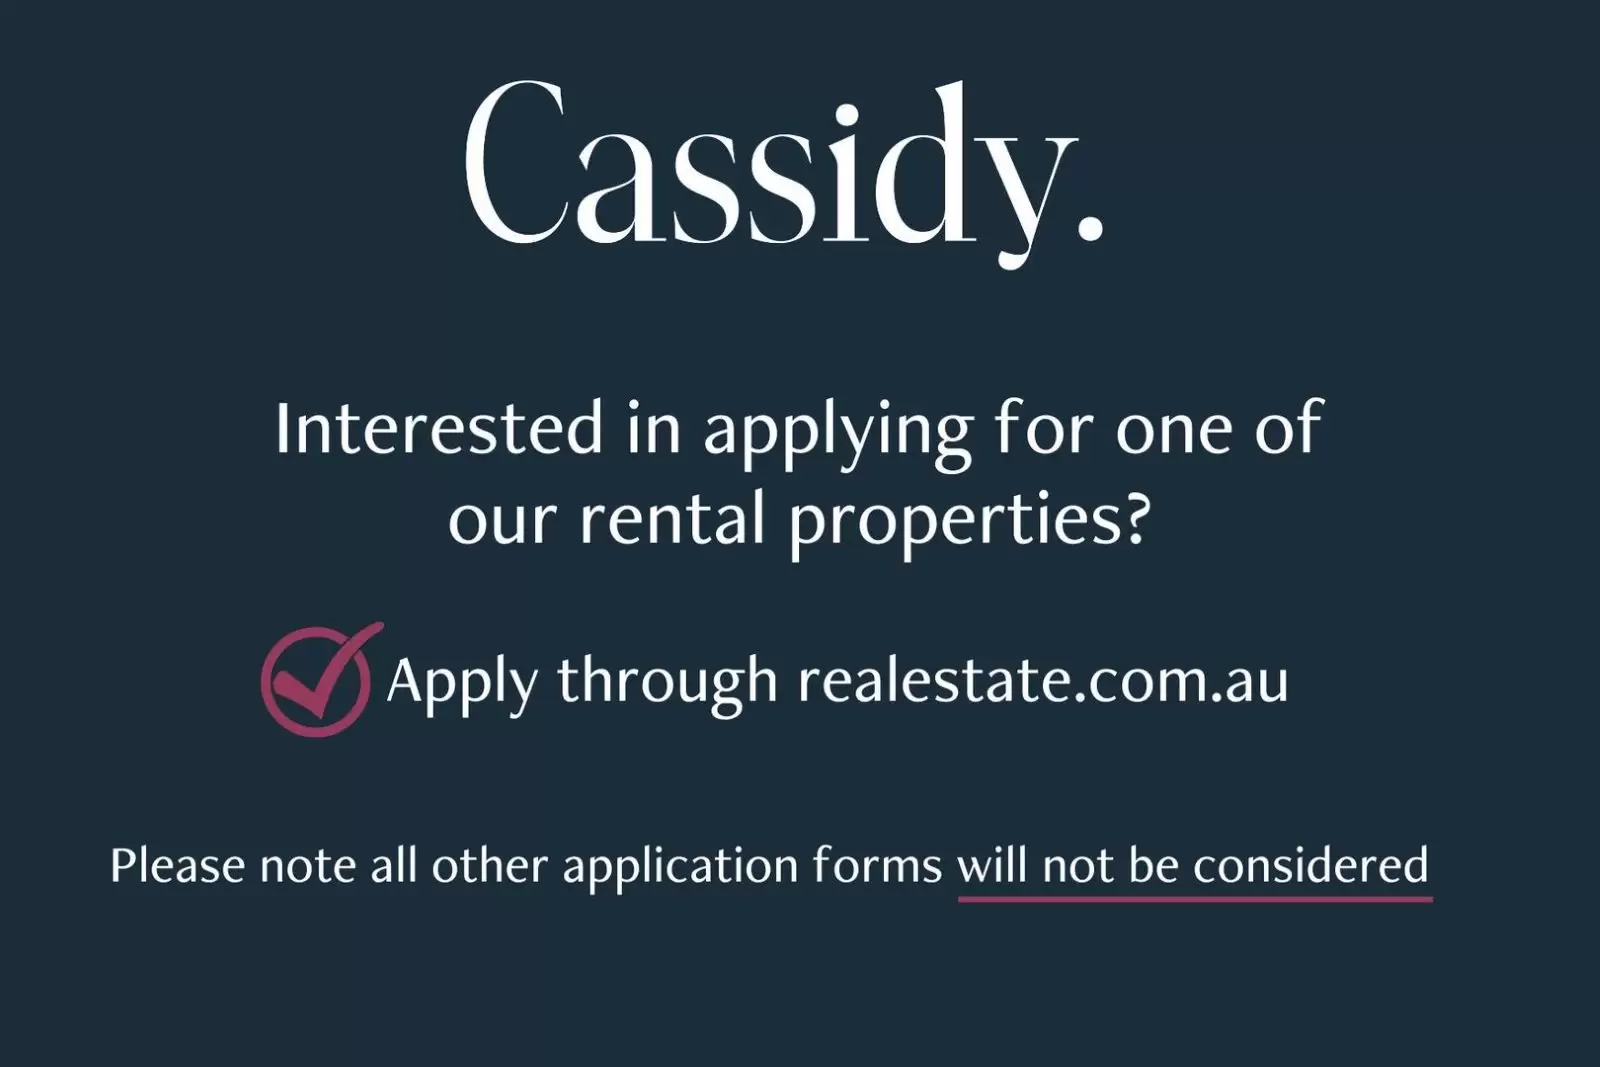 5 Wade Street, Putney For Lease by Cassidy Real Estate - image 1